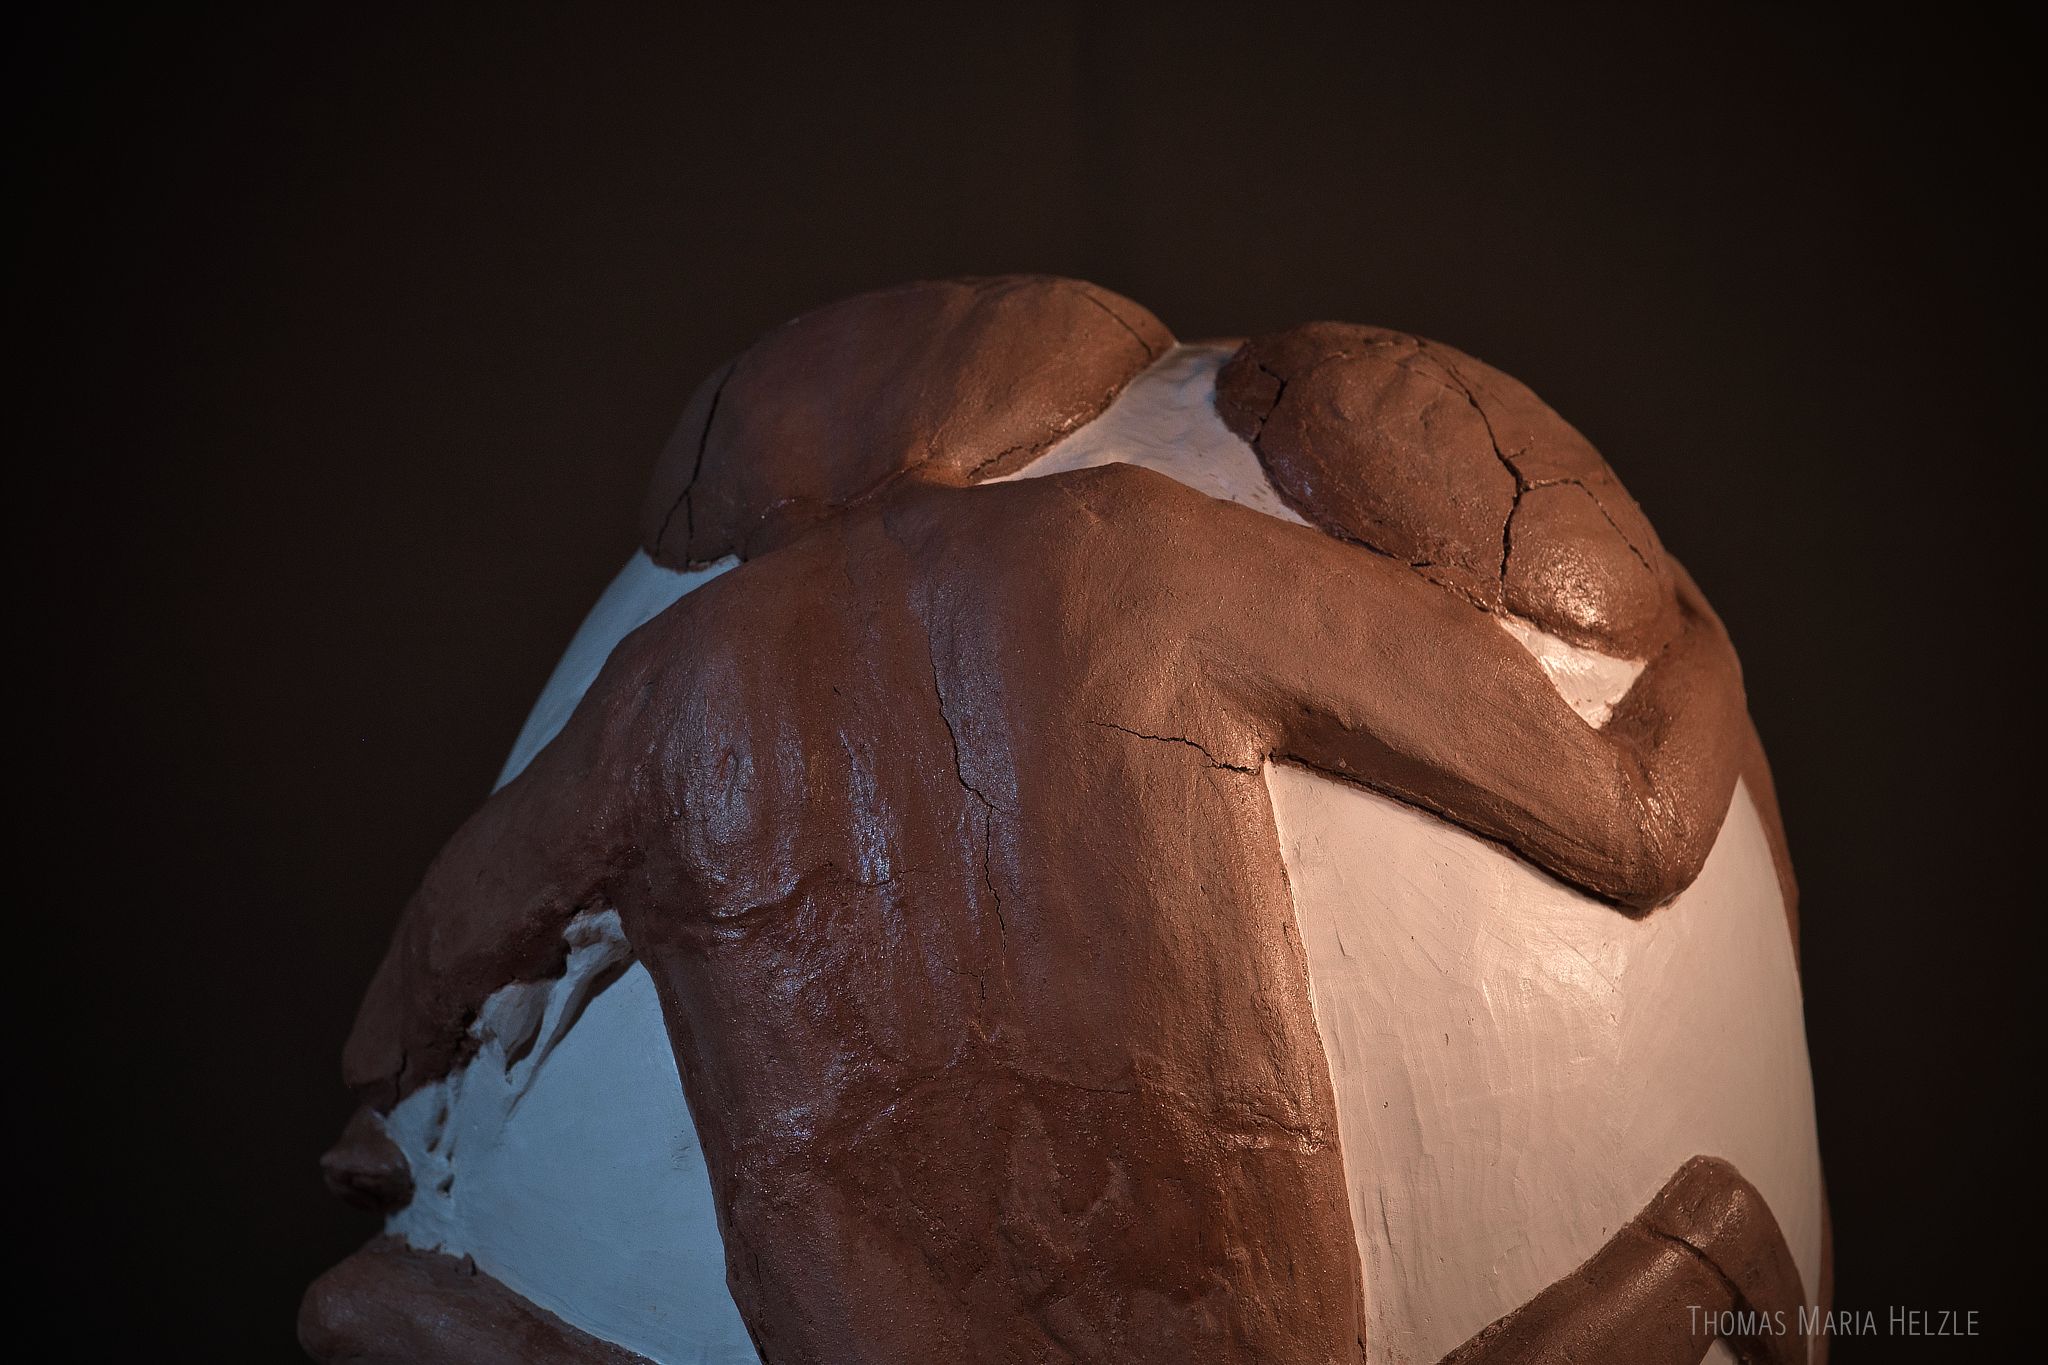 Closeup of the Lovers sculpture, showing the upper back of the heavier figure with cracks and overgrown areas. The second figure is only partially visible. The basis is an egg-shape made of plaster with the two figures modelled from dark brown-red clay in relief on top. The background is dark grey.